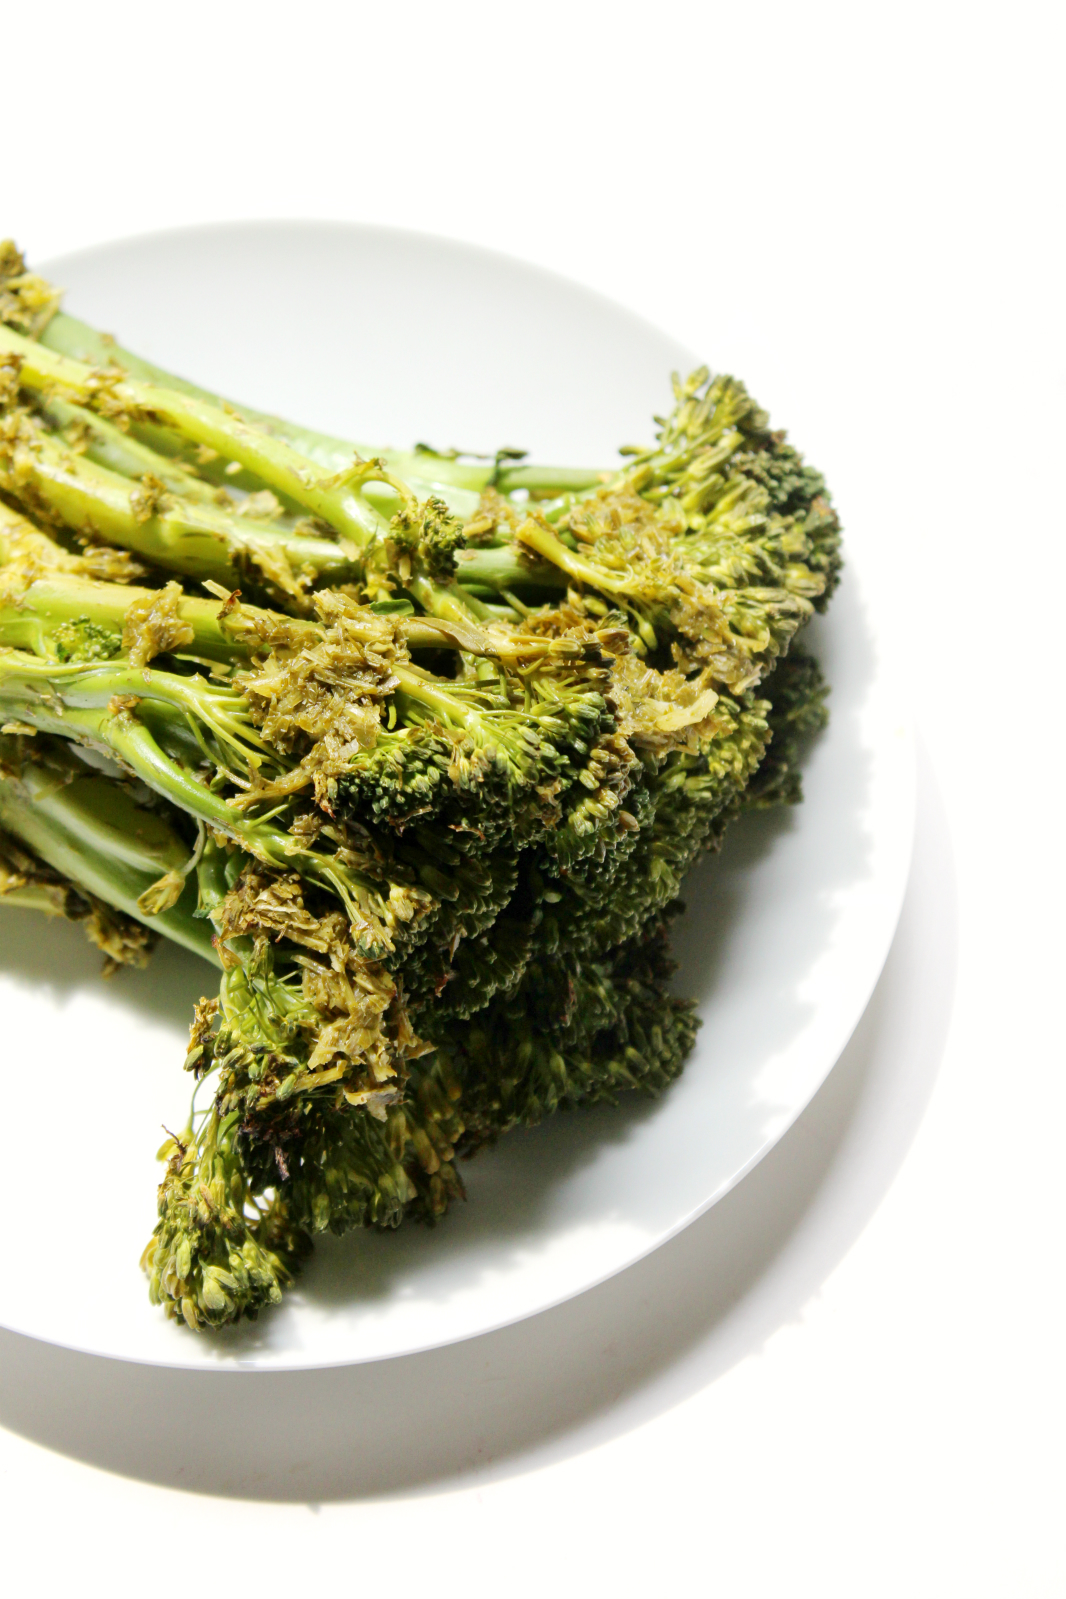 Roasted Broccolini with Lemon & Garlic Herb Sauce | Strength and Sunshine @RebeccaGF666 A simply refreshing way to bring some flavor to roasted broccolini. An easy and delicious vegetable side dish, to complement any meal, with loads of fresh herbs, lemon, and garlic. Gluten-free, vegan, paleo, dairy-free, and healthy.